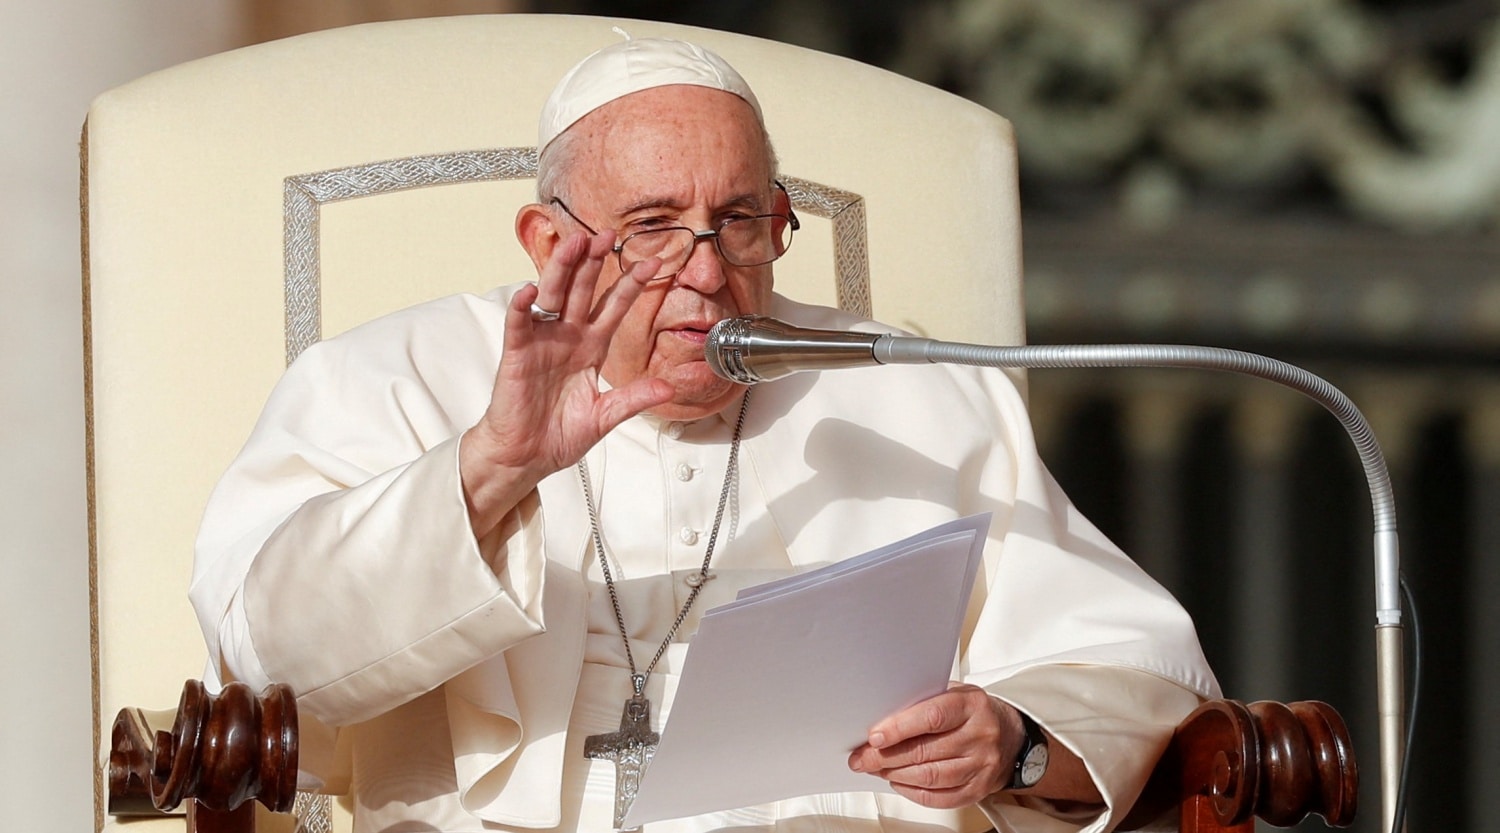 Pope Francis speaks during his general audience at the Vatican Oct. 26, 2022. (CNS photo/Remo Casilli, Reuters)